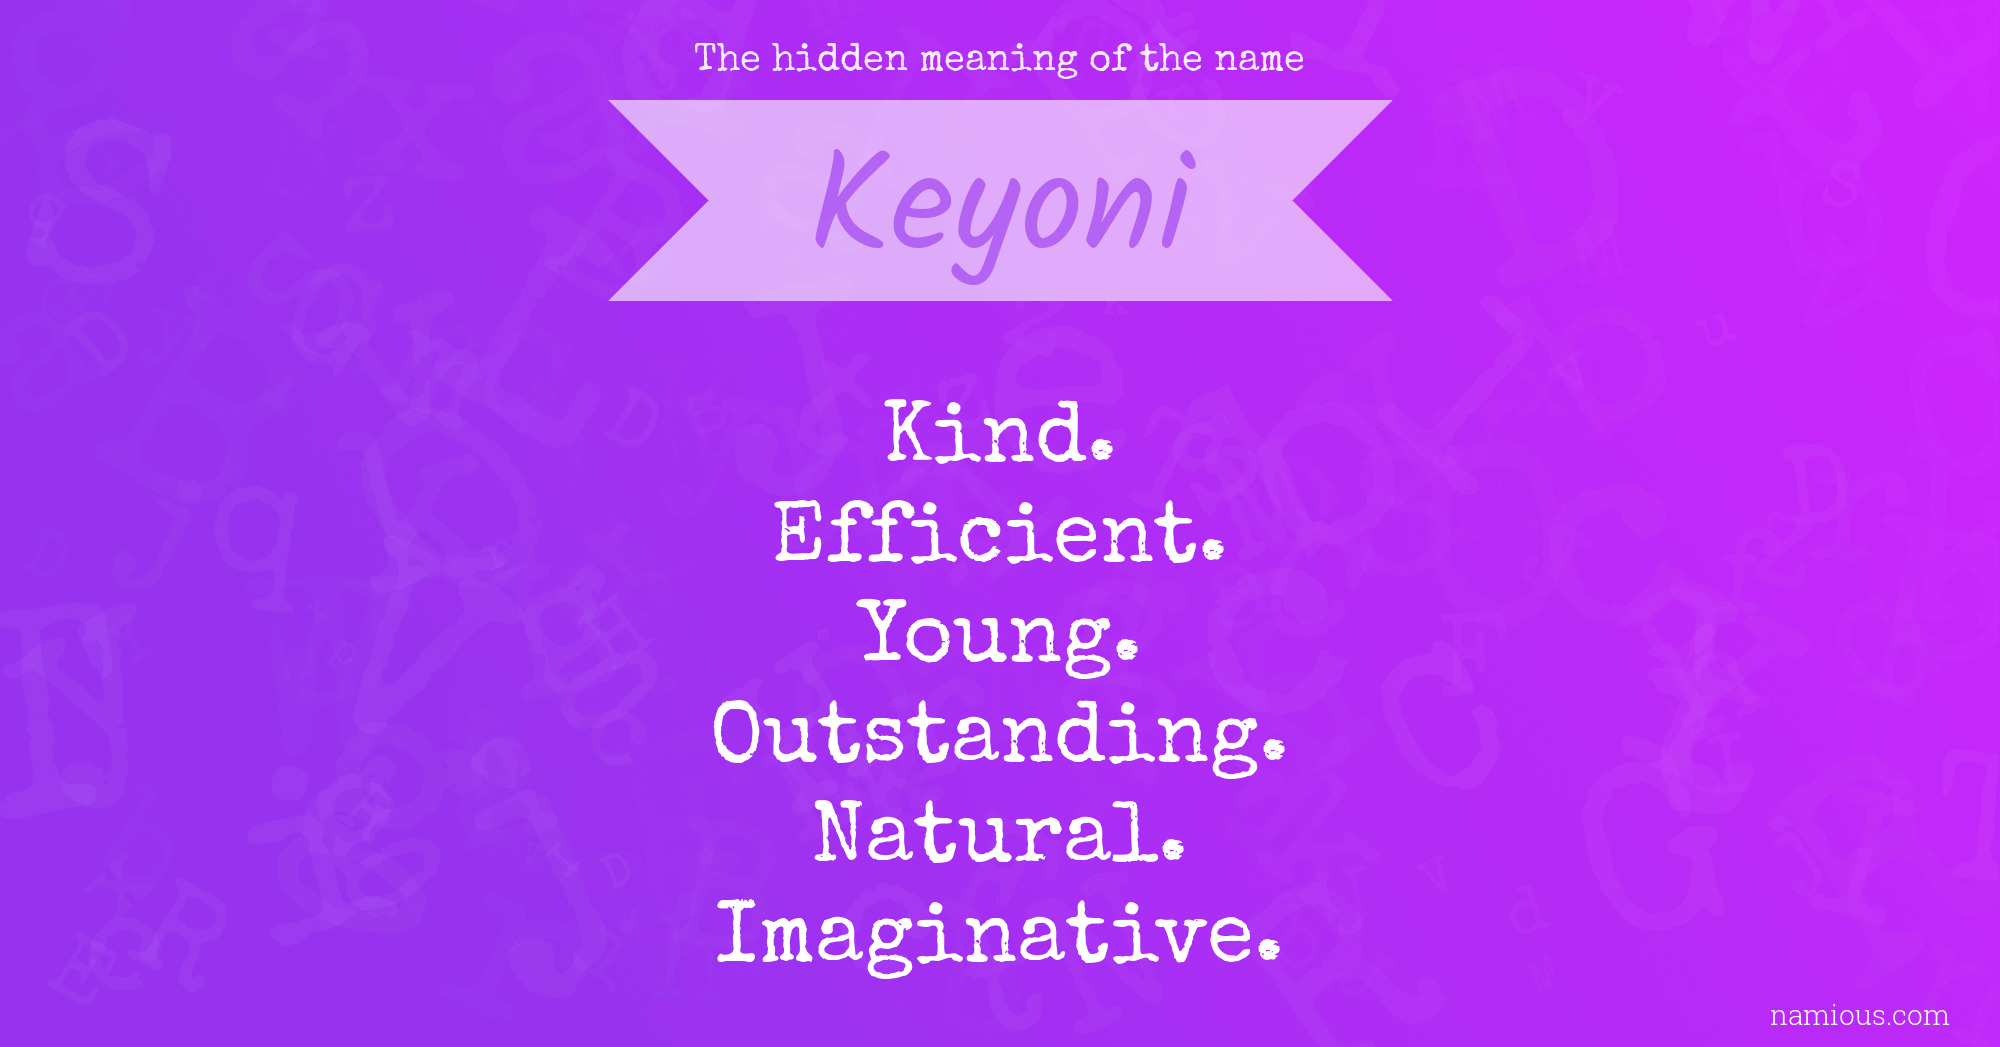 The hidden meaning of the name Keyoni